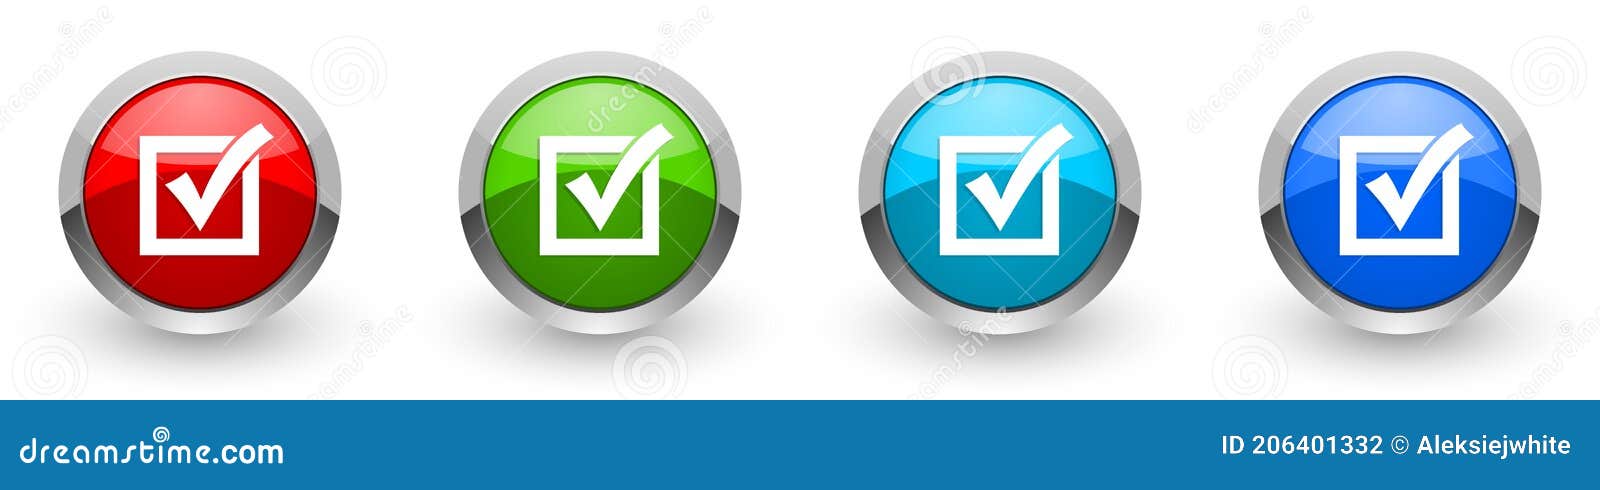 correct, check box silver metallic glossy icons, set of modern  buttons for web, internet and mobile applications in four